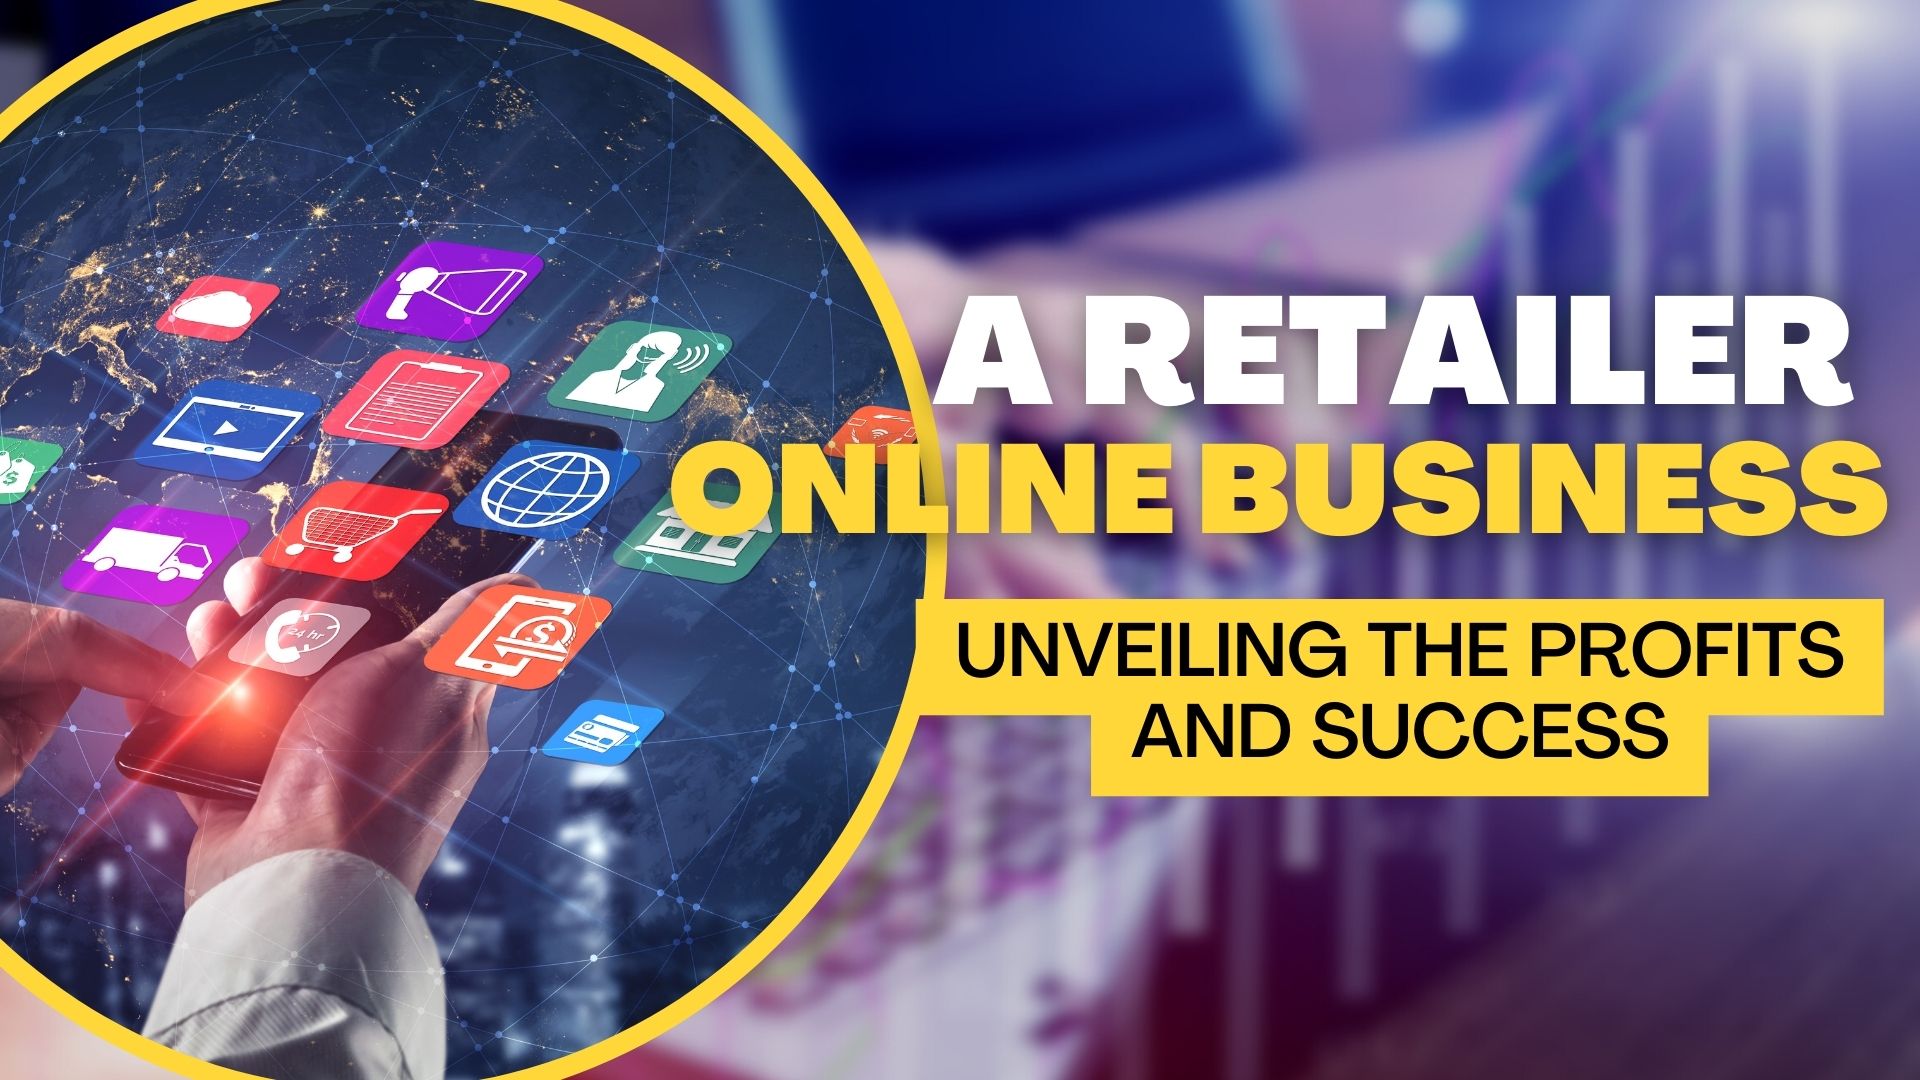 A Retailer Owns a Large Online Business